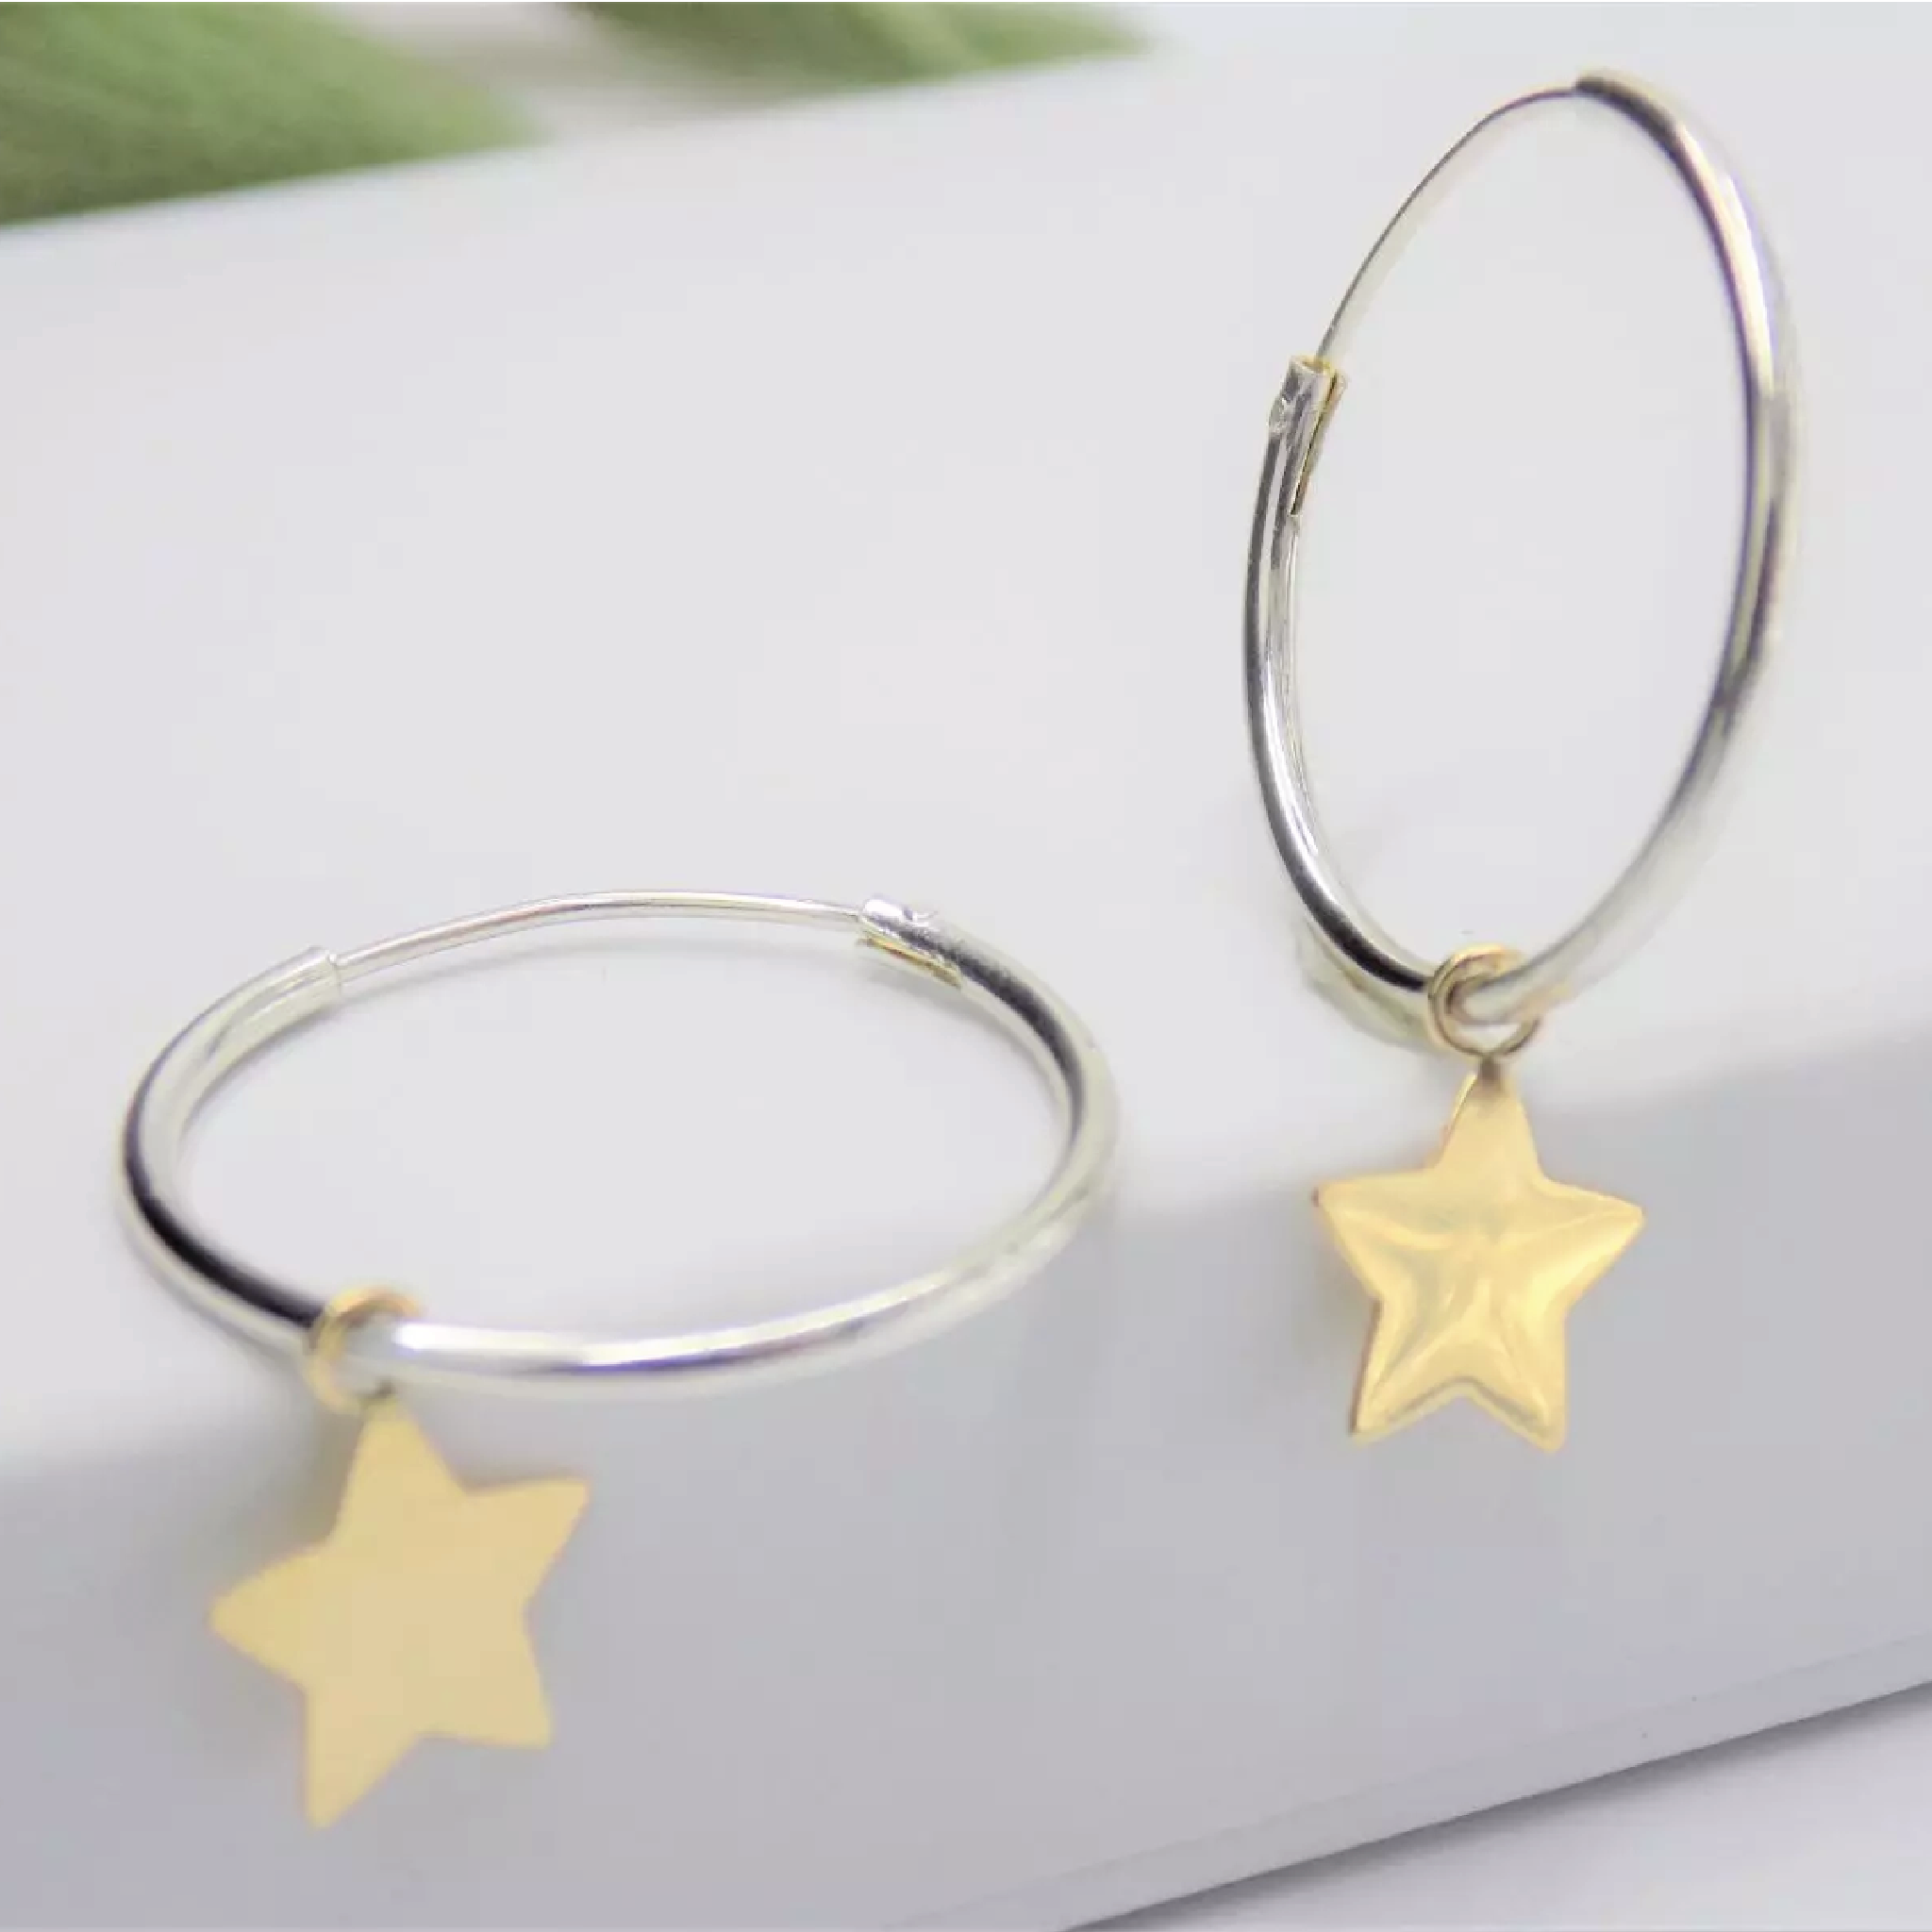 Silver Hoops With Gold Star Earrings